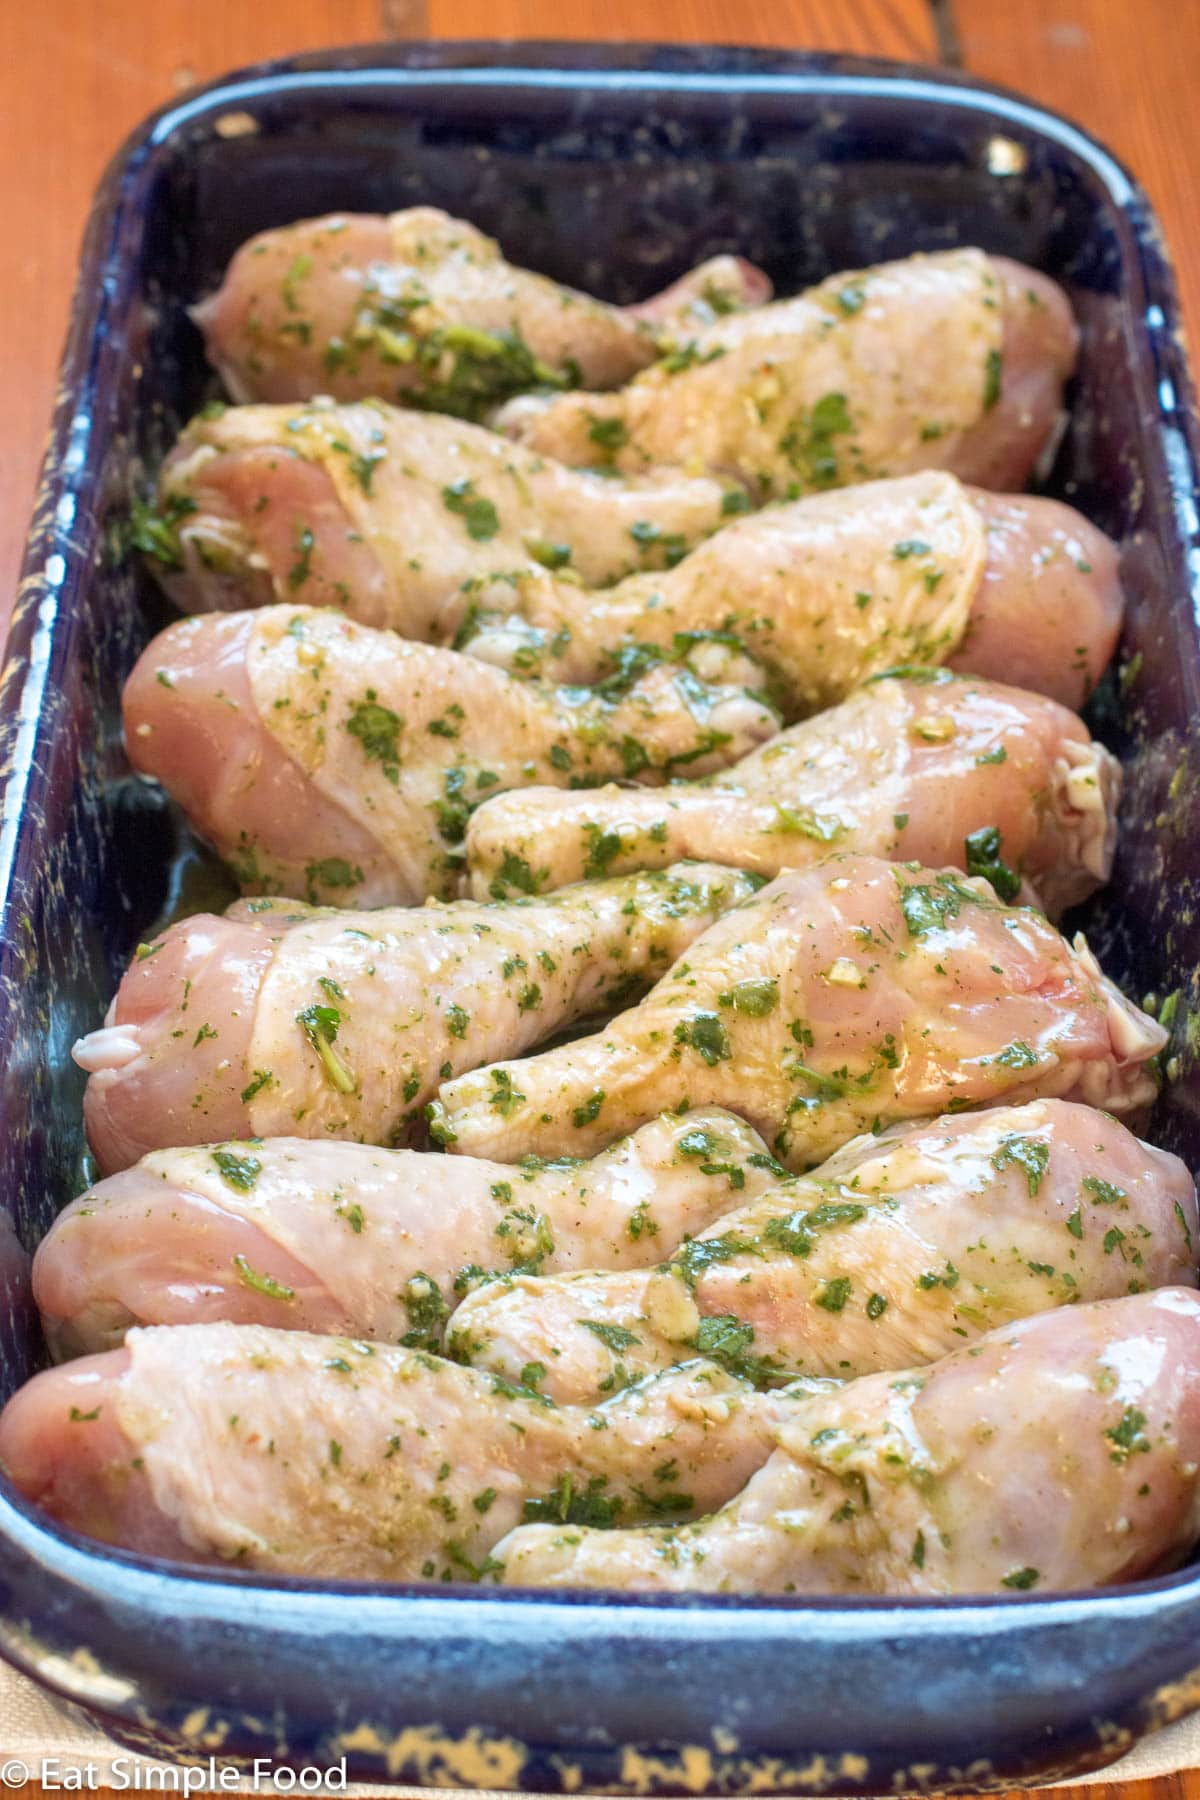 Uncooked Chicken legs in a cilantro sauce in a blue baking dish.